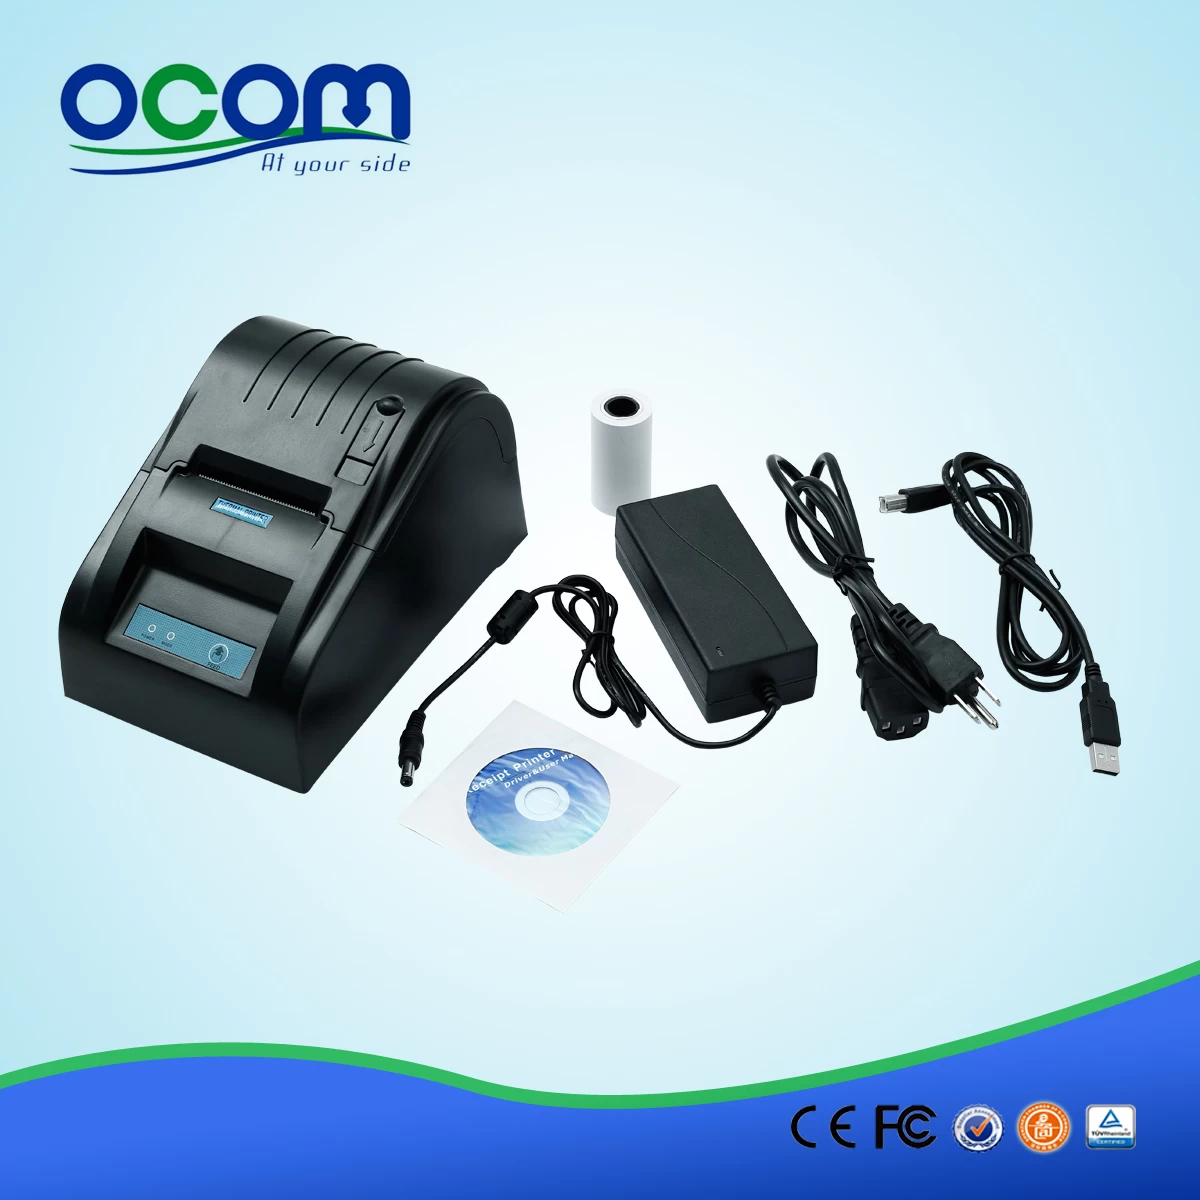 OCPP-585 58mm thermal receipt printer with optional bluetooth